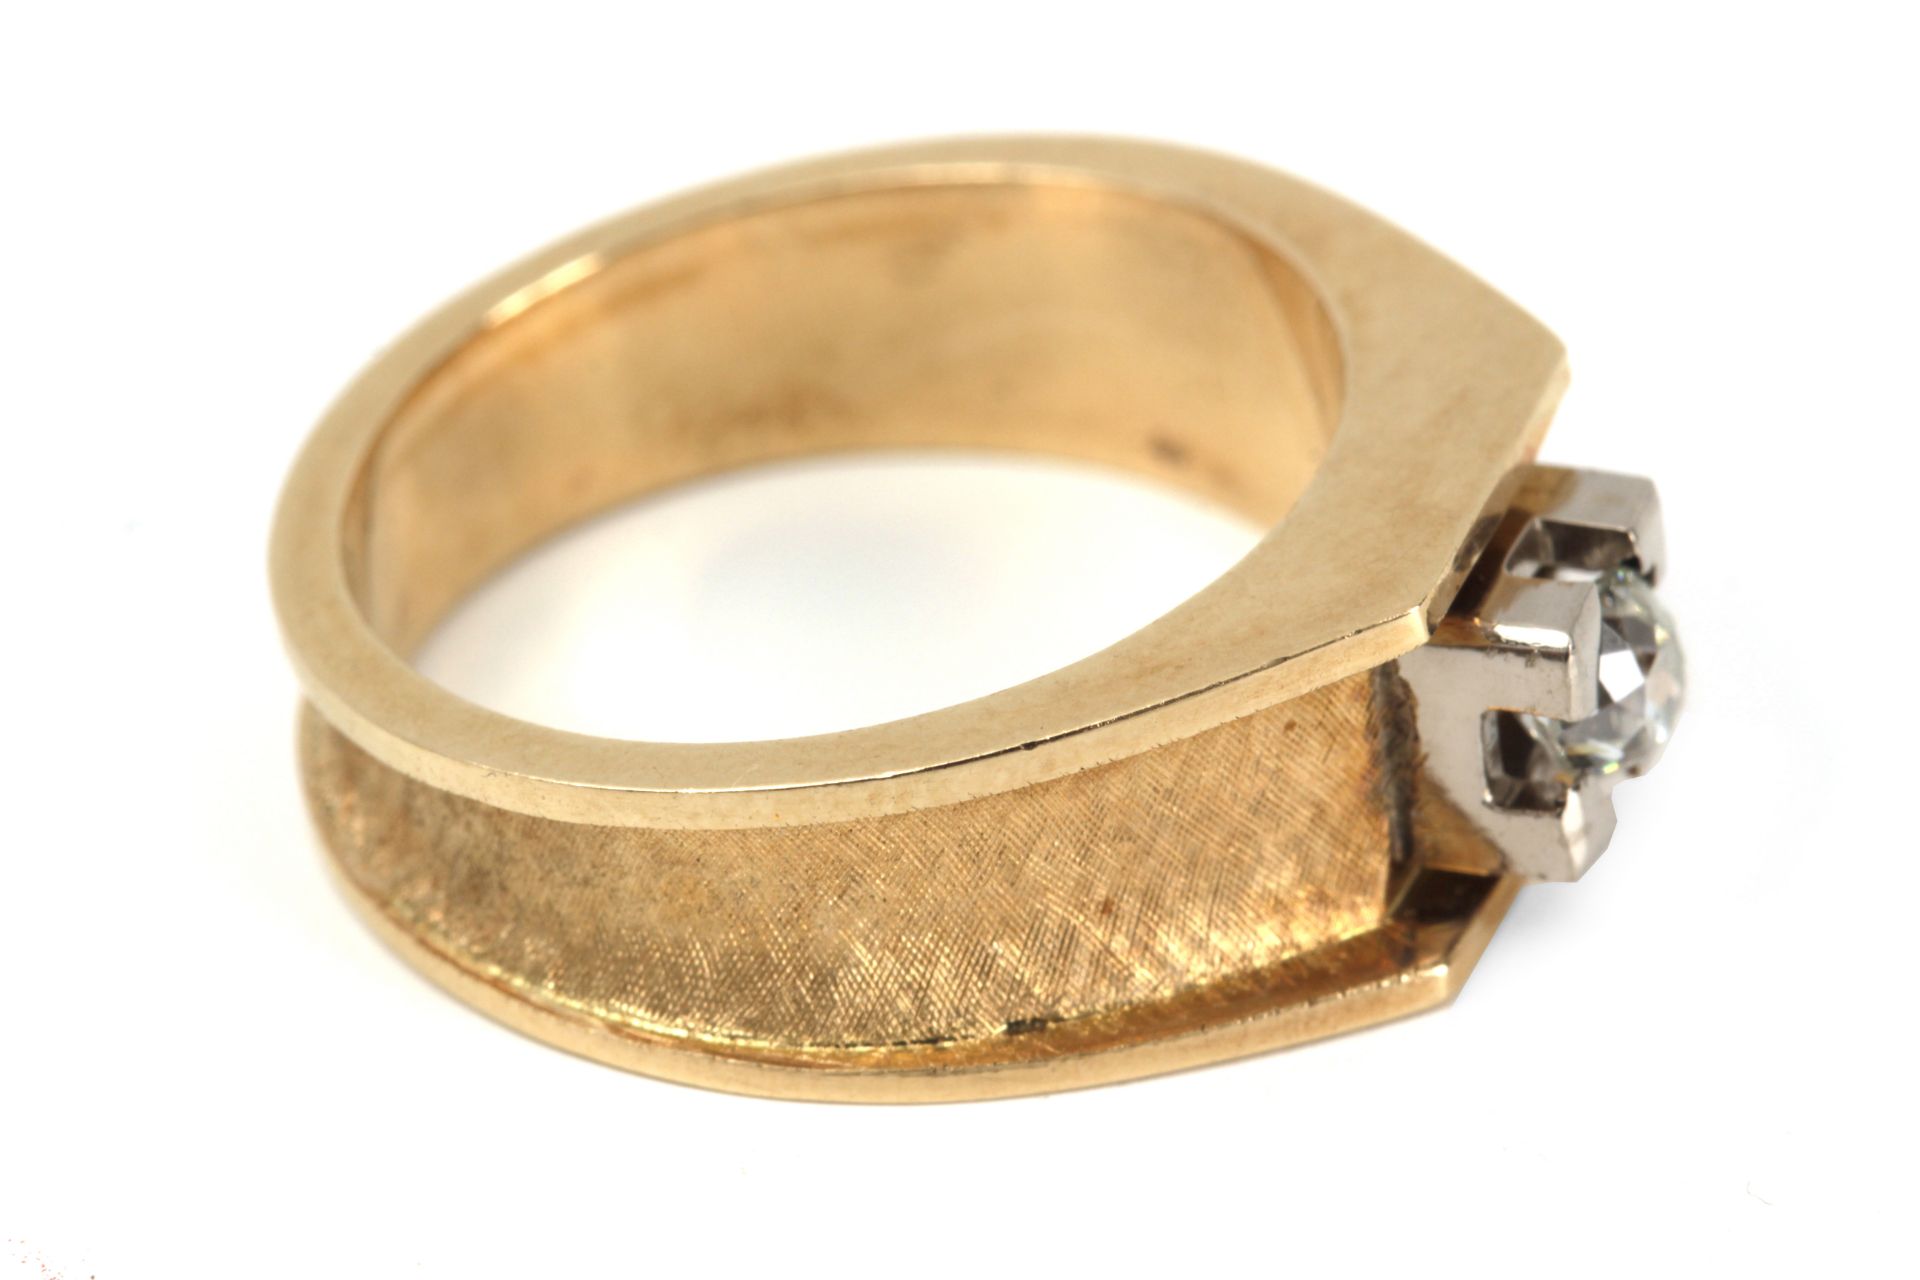 A 0,38 ct. old European cut diamond solitaire ring with an 18k. yellow gold and platinum setting - Image 3 of 4